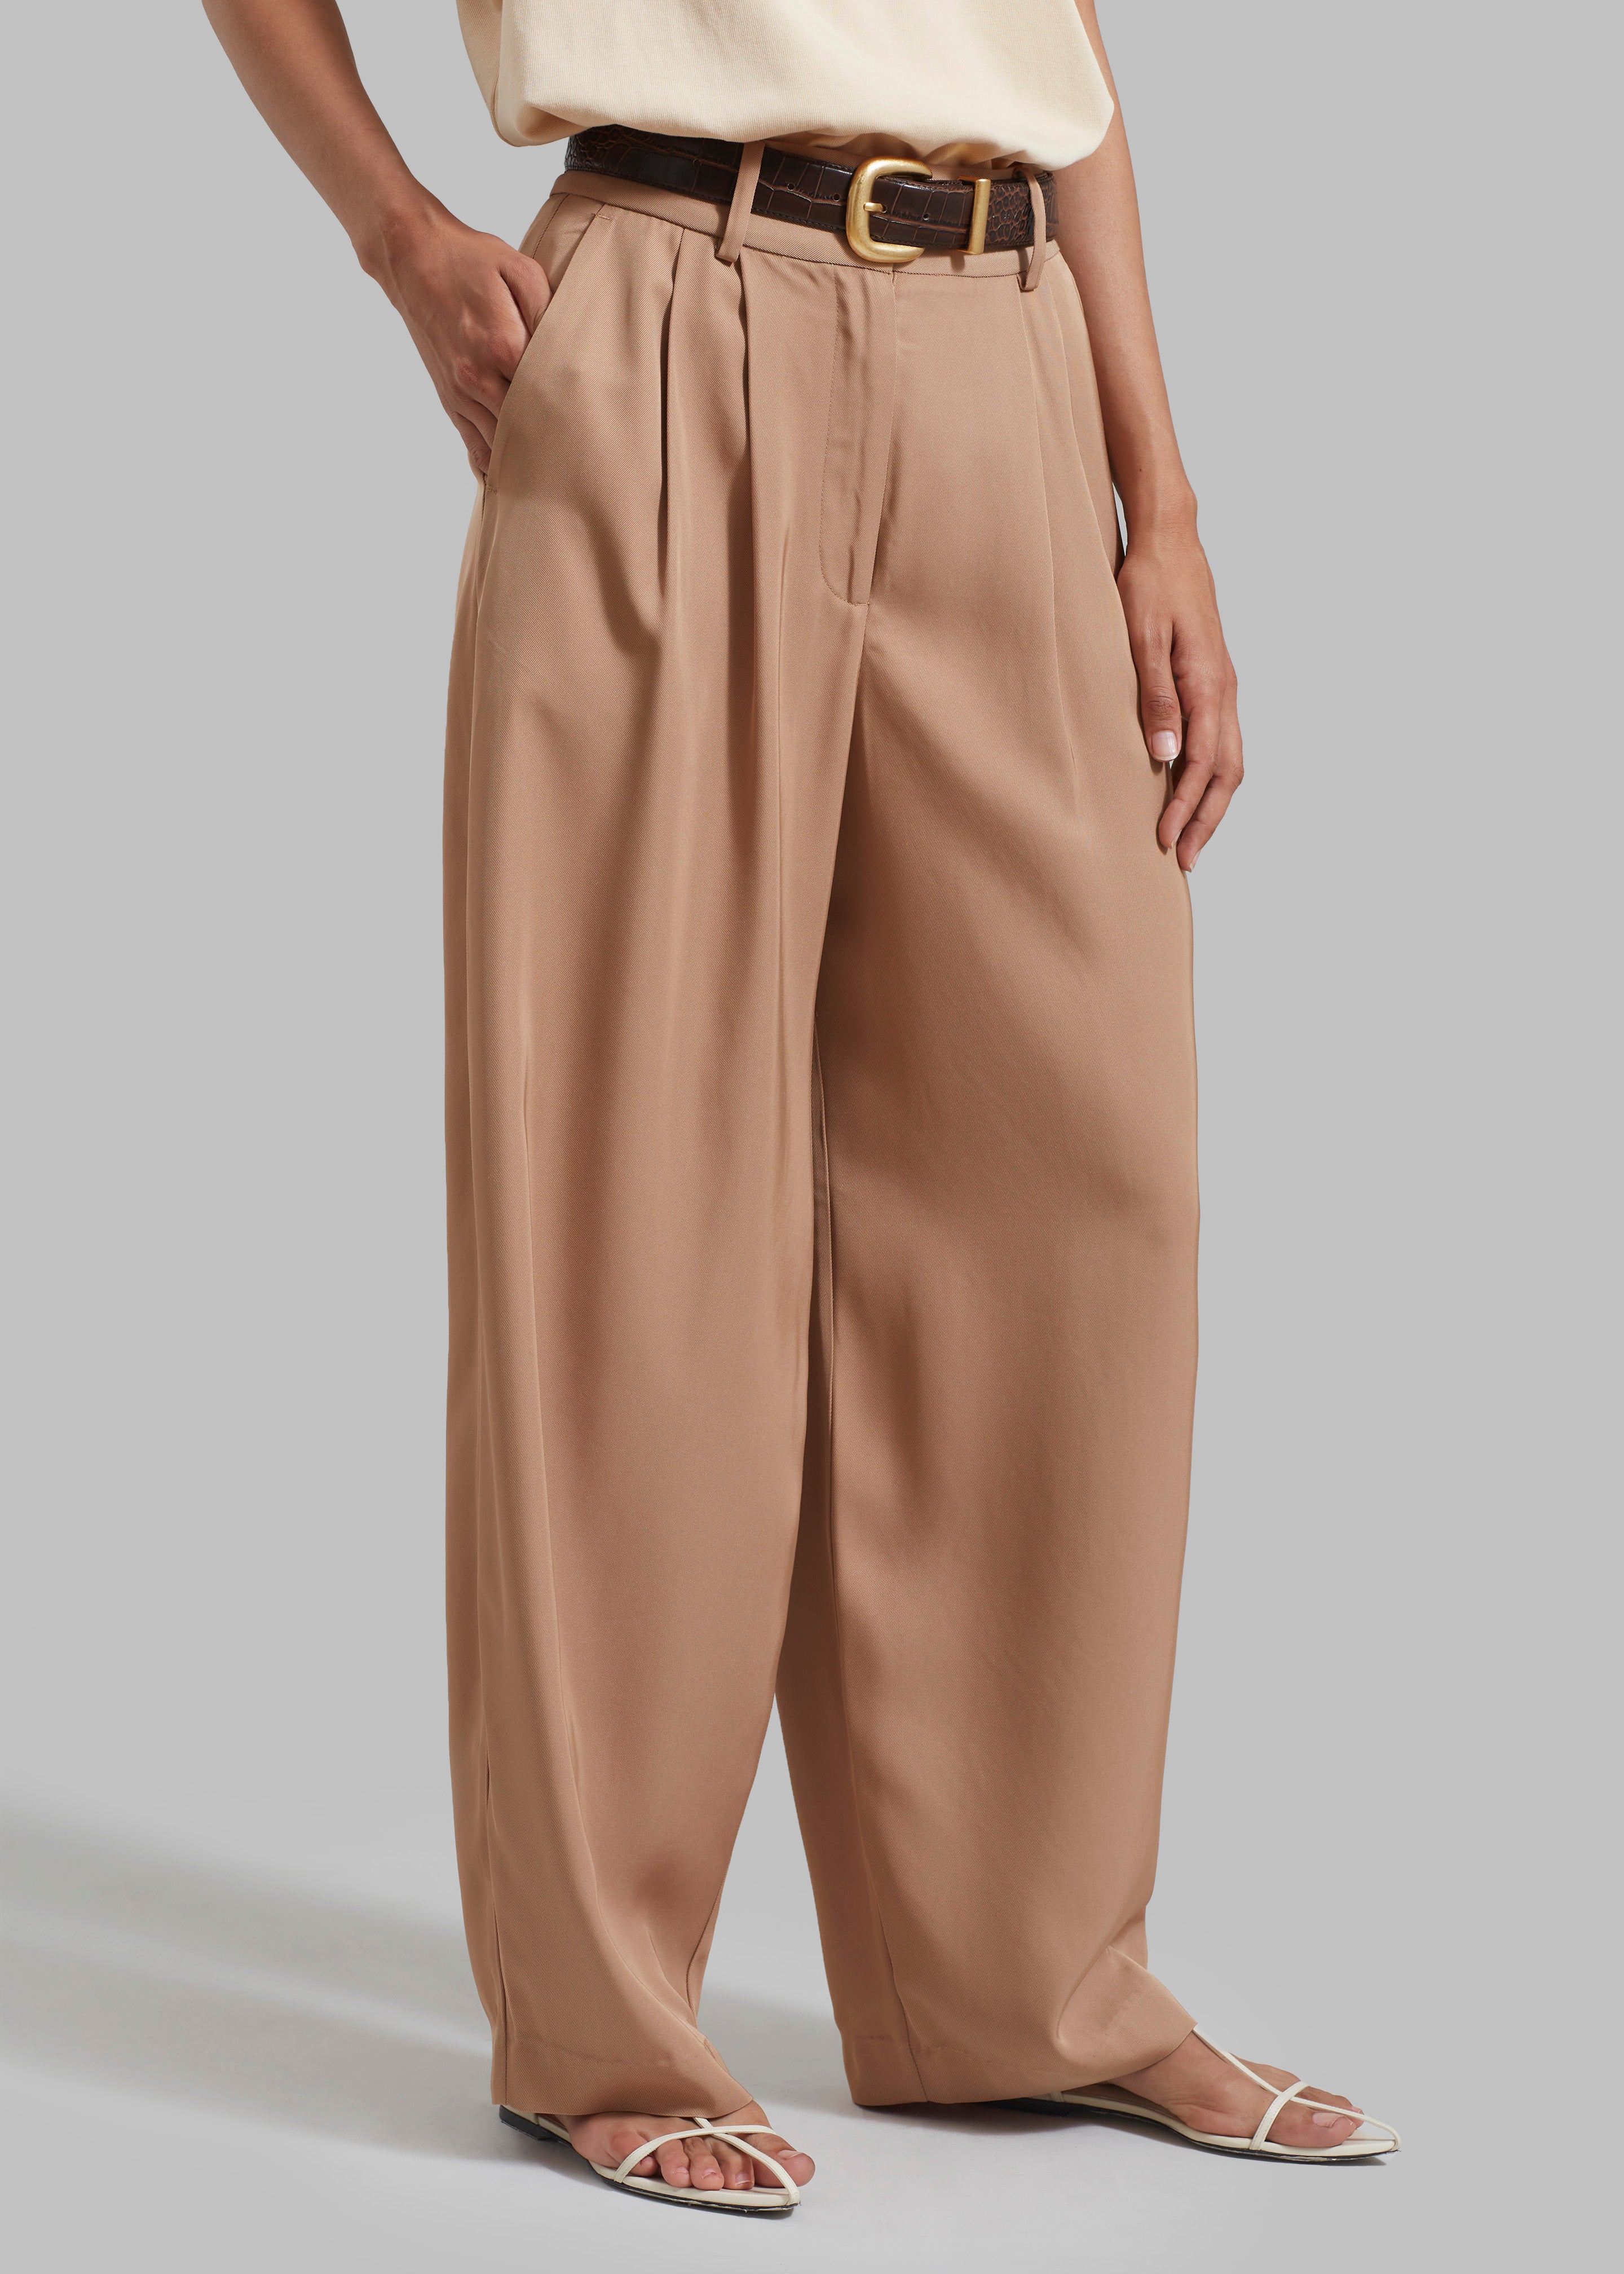 By Malene Birger Piscali Mid-Rise Pants - Tobacco Brown - 5